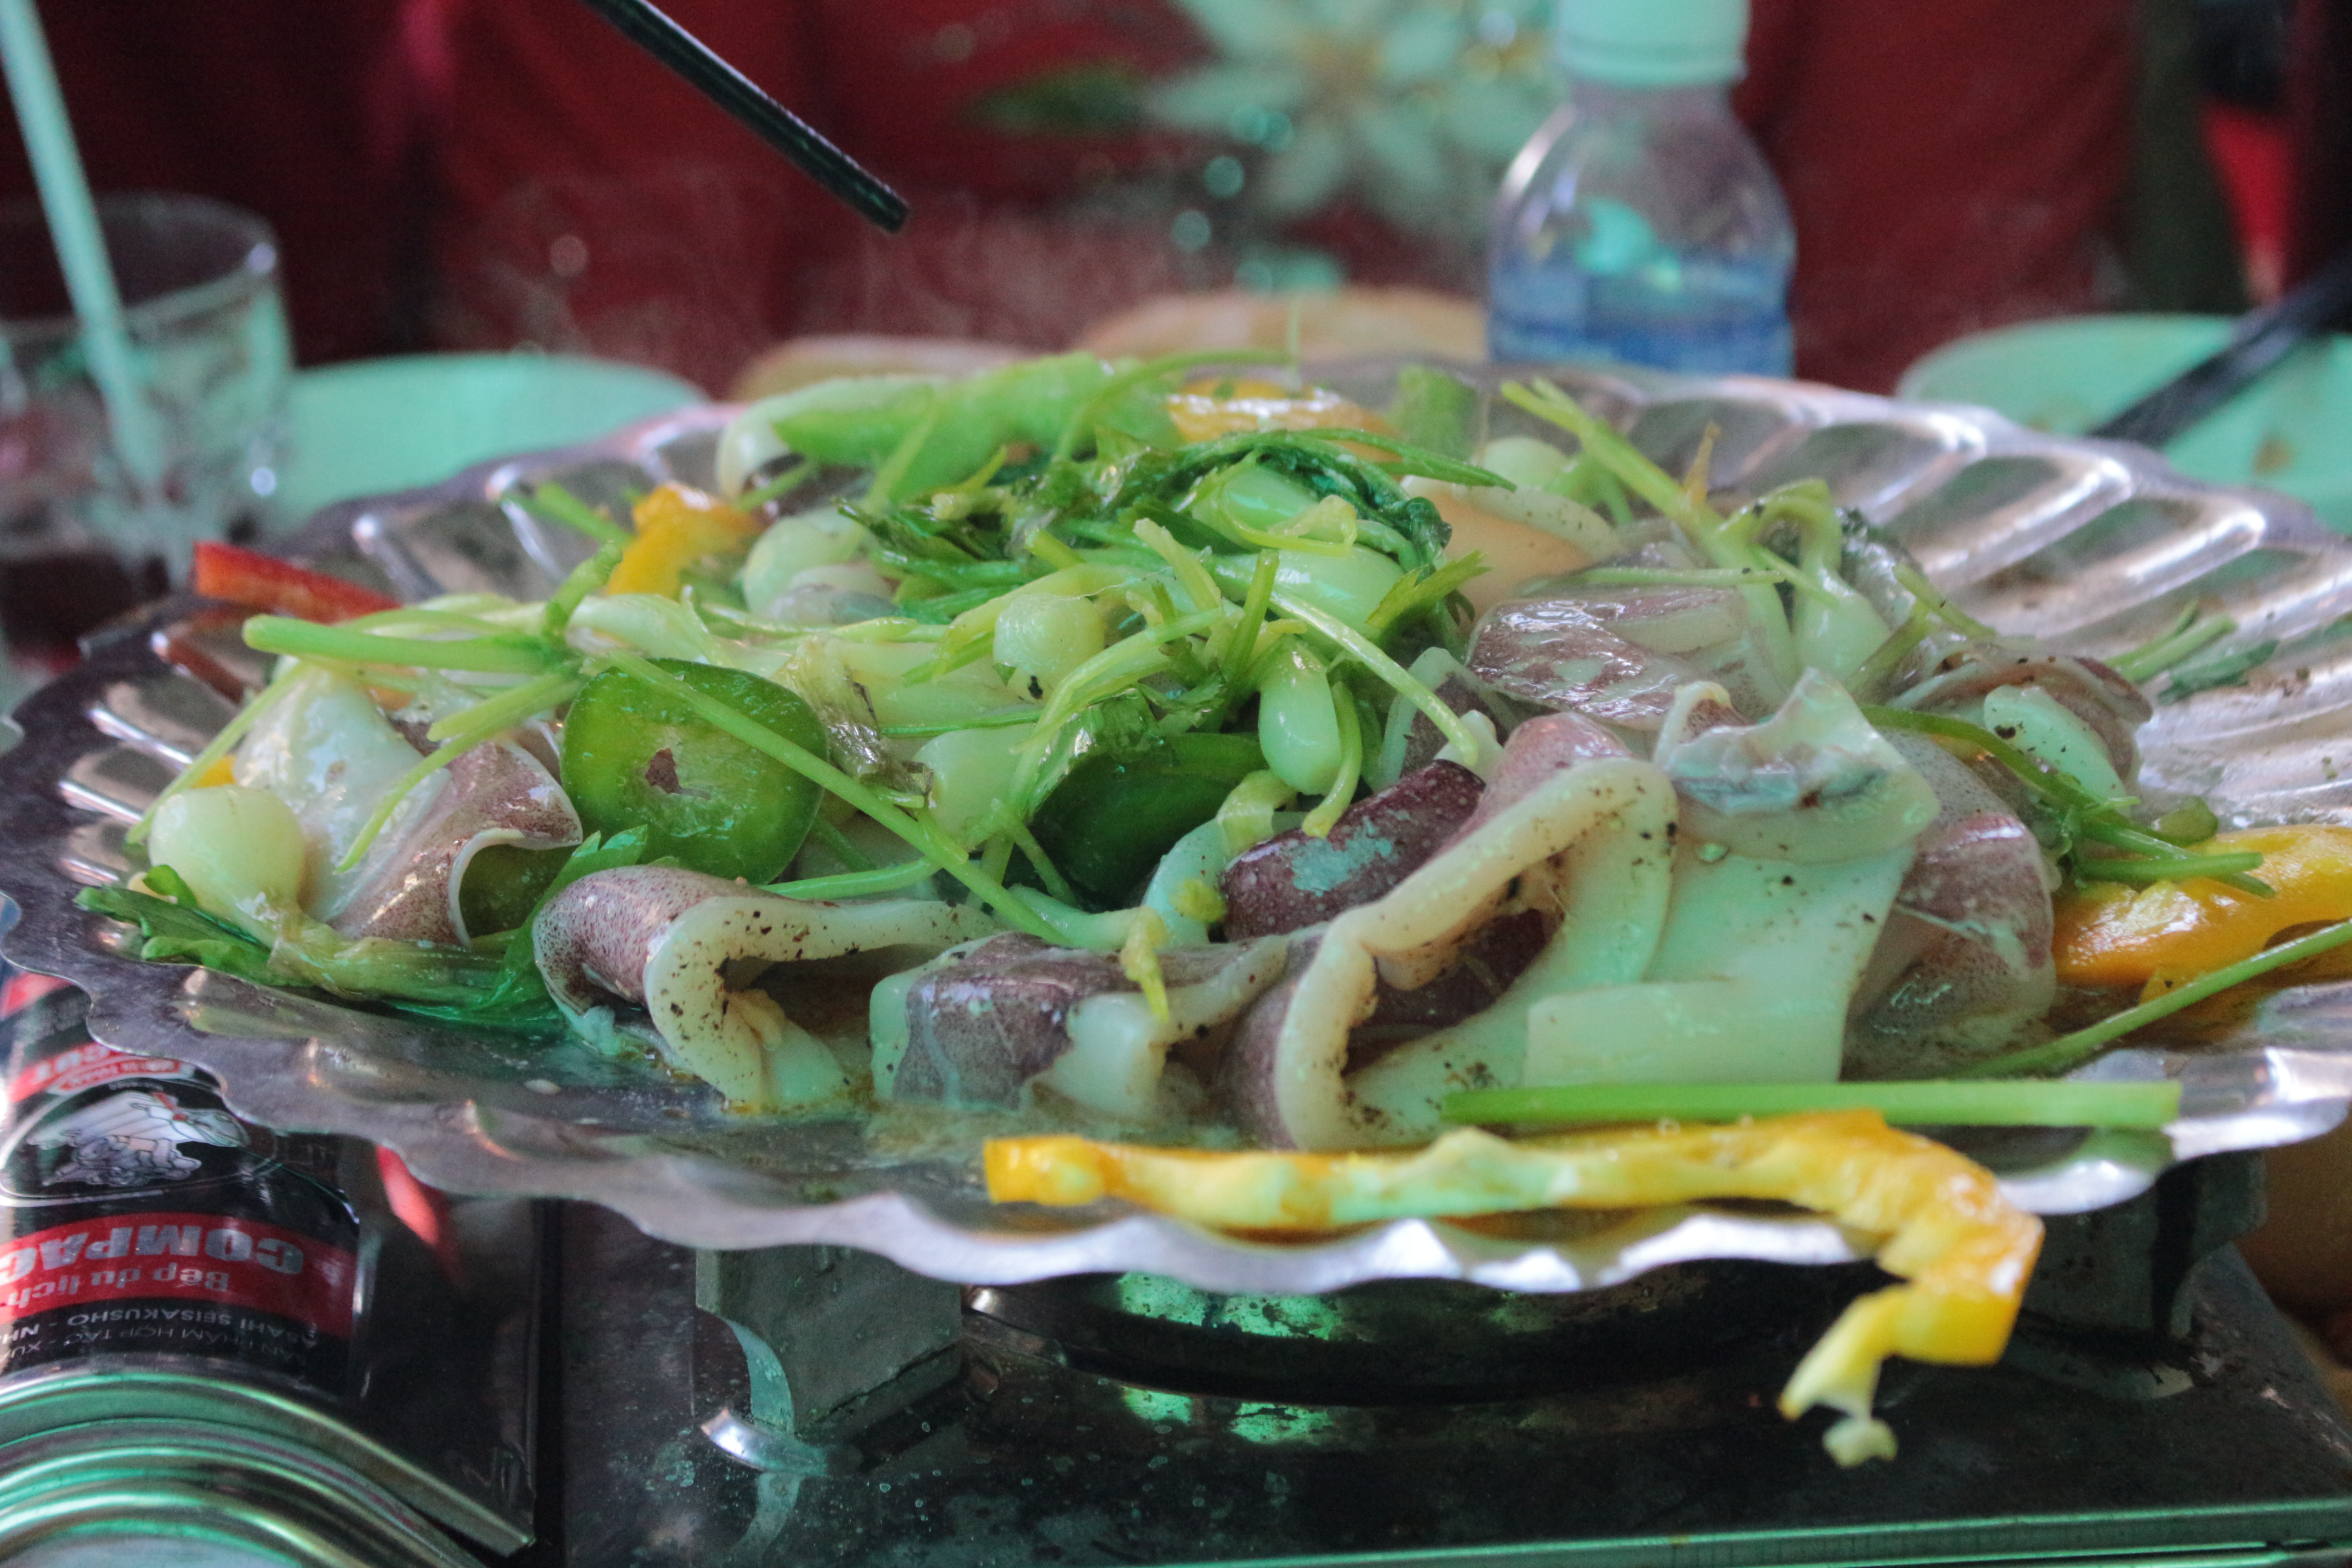 Local food is served at a wedding party in the suburb of Can Tho City in Mekong Delta, Vietnam. Photo: Ray Kuschert / Tuoi Tre News